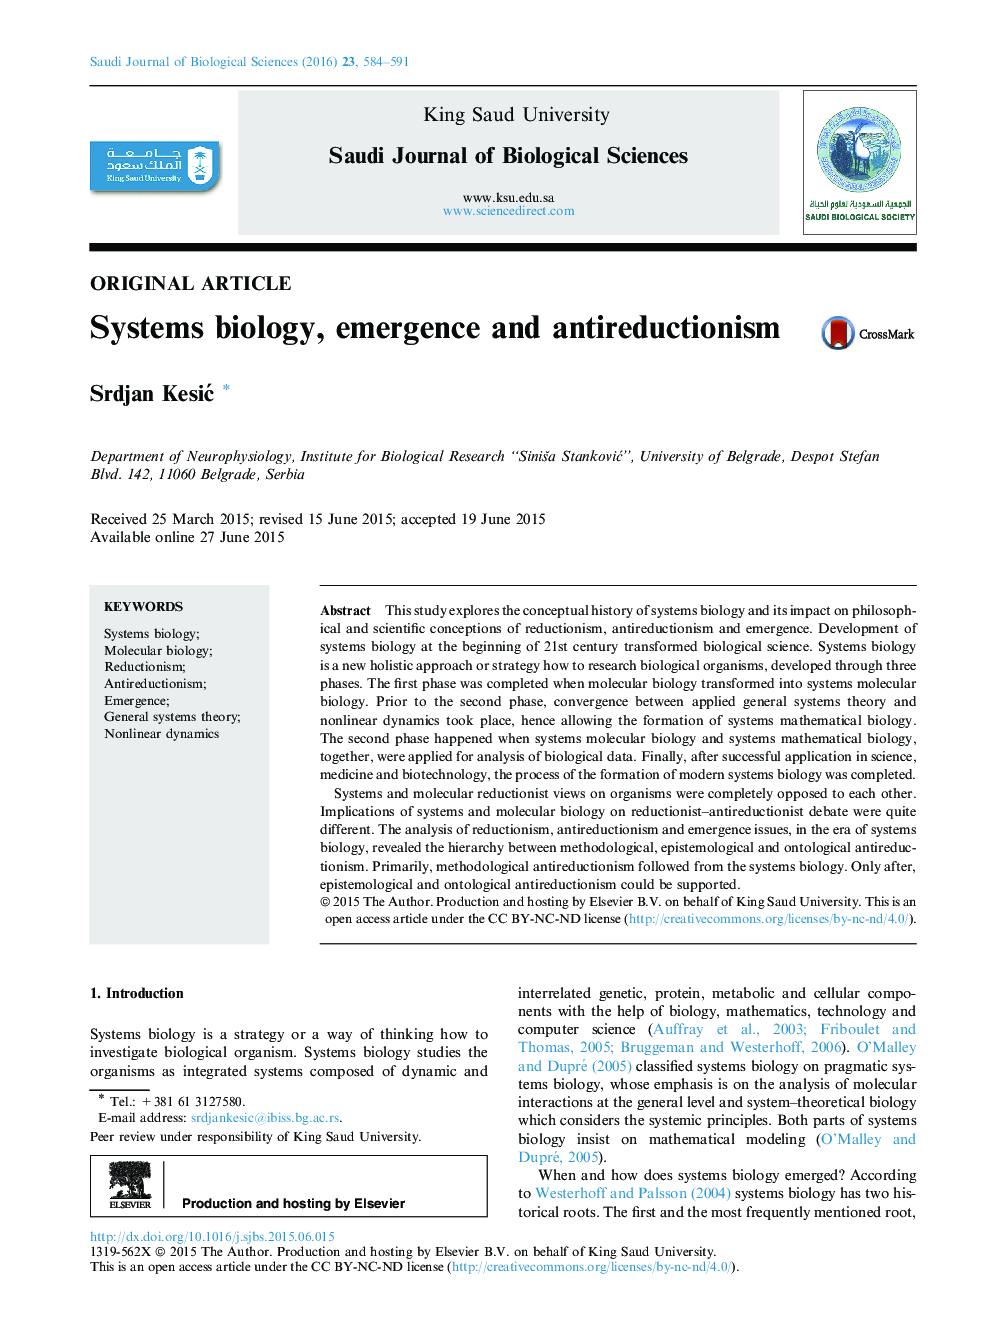 Systems biology, emergence and antireductionism 